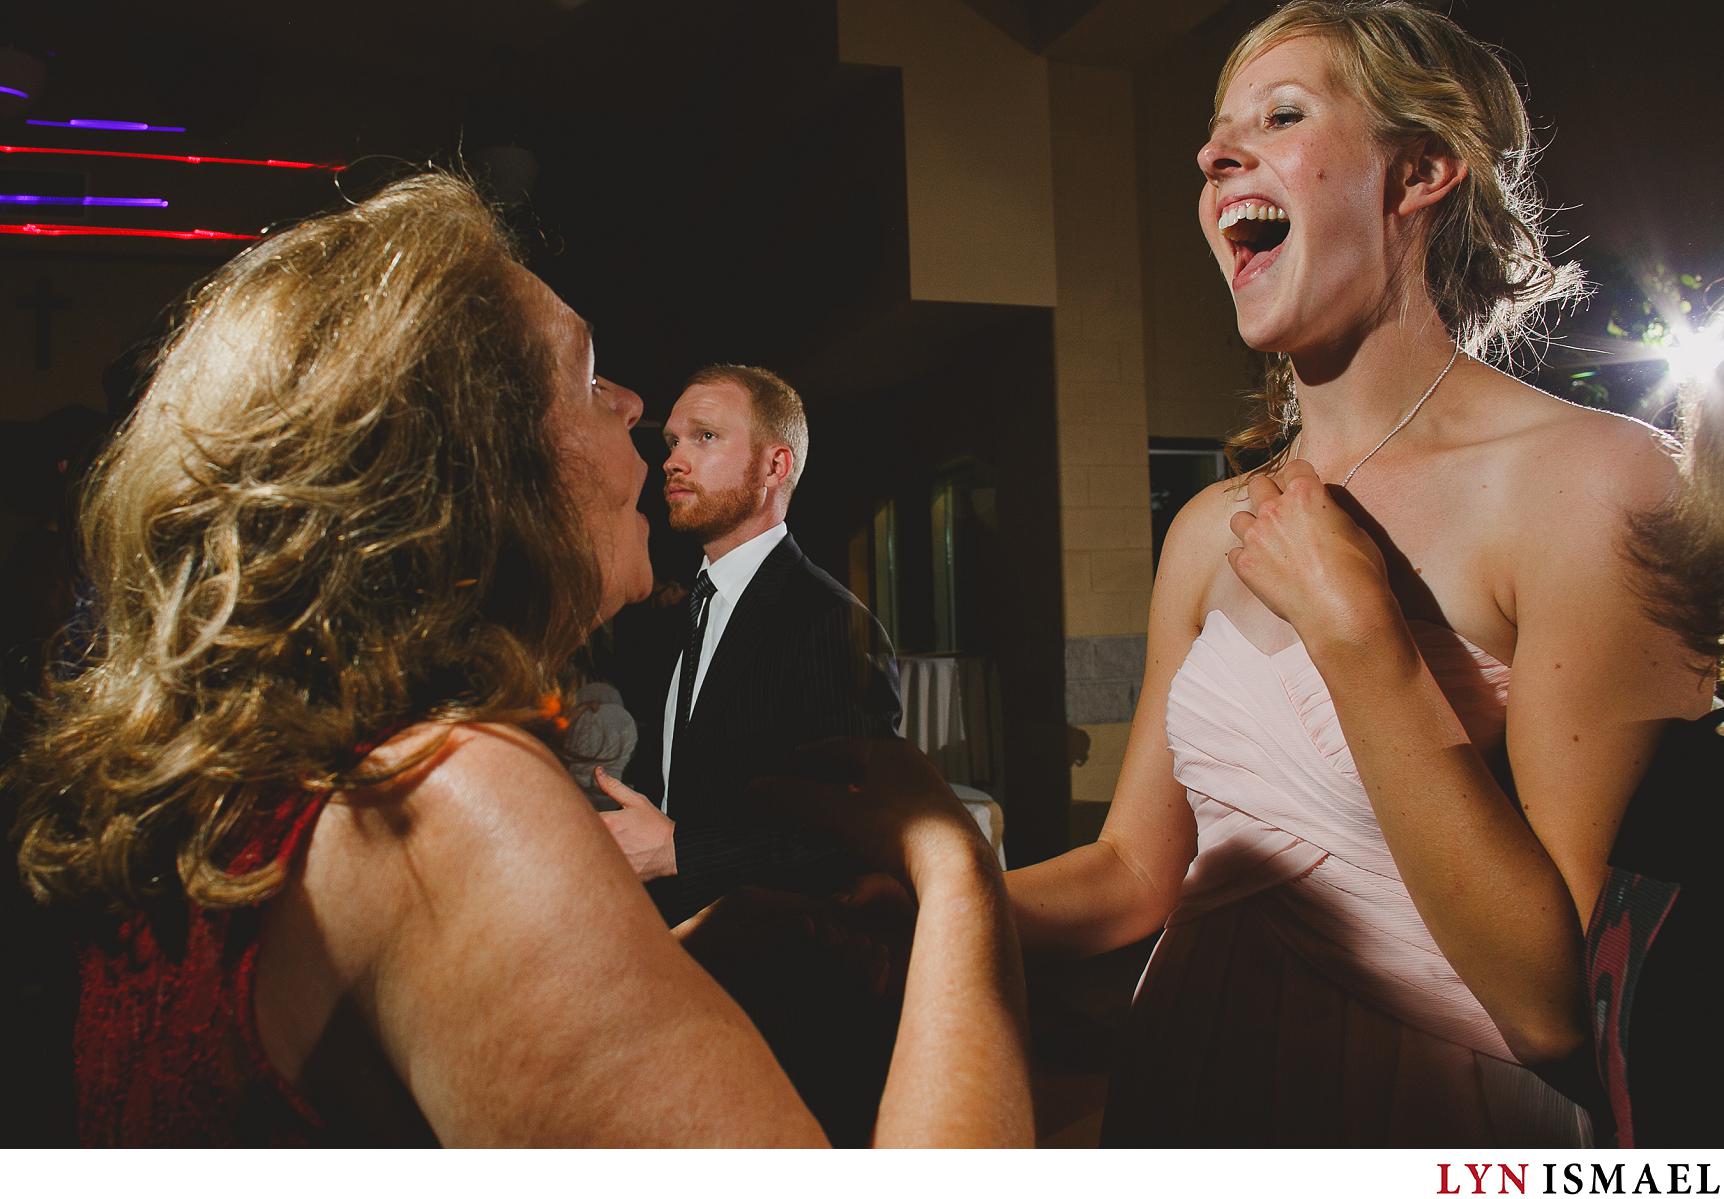 Bridesmaid and mother of the groom having a great time dancing.